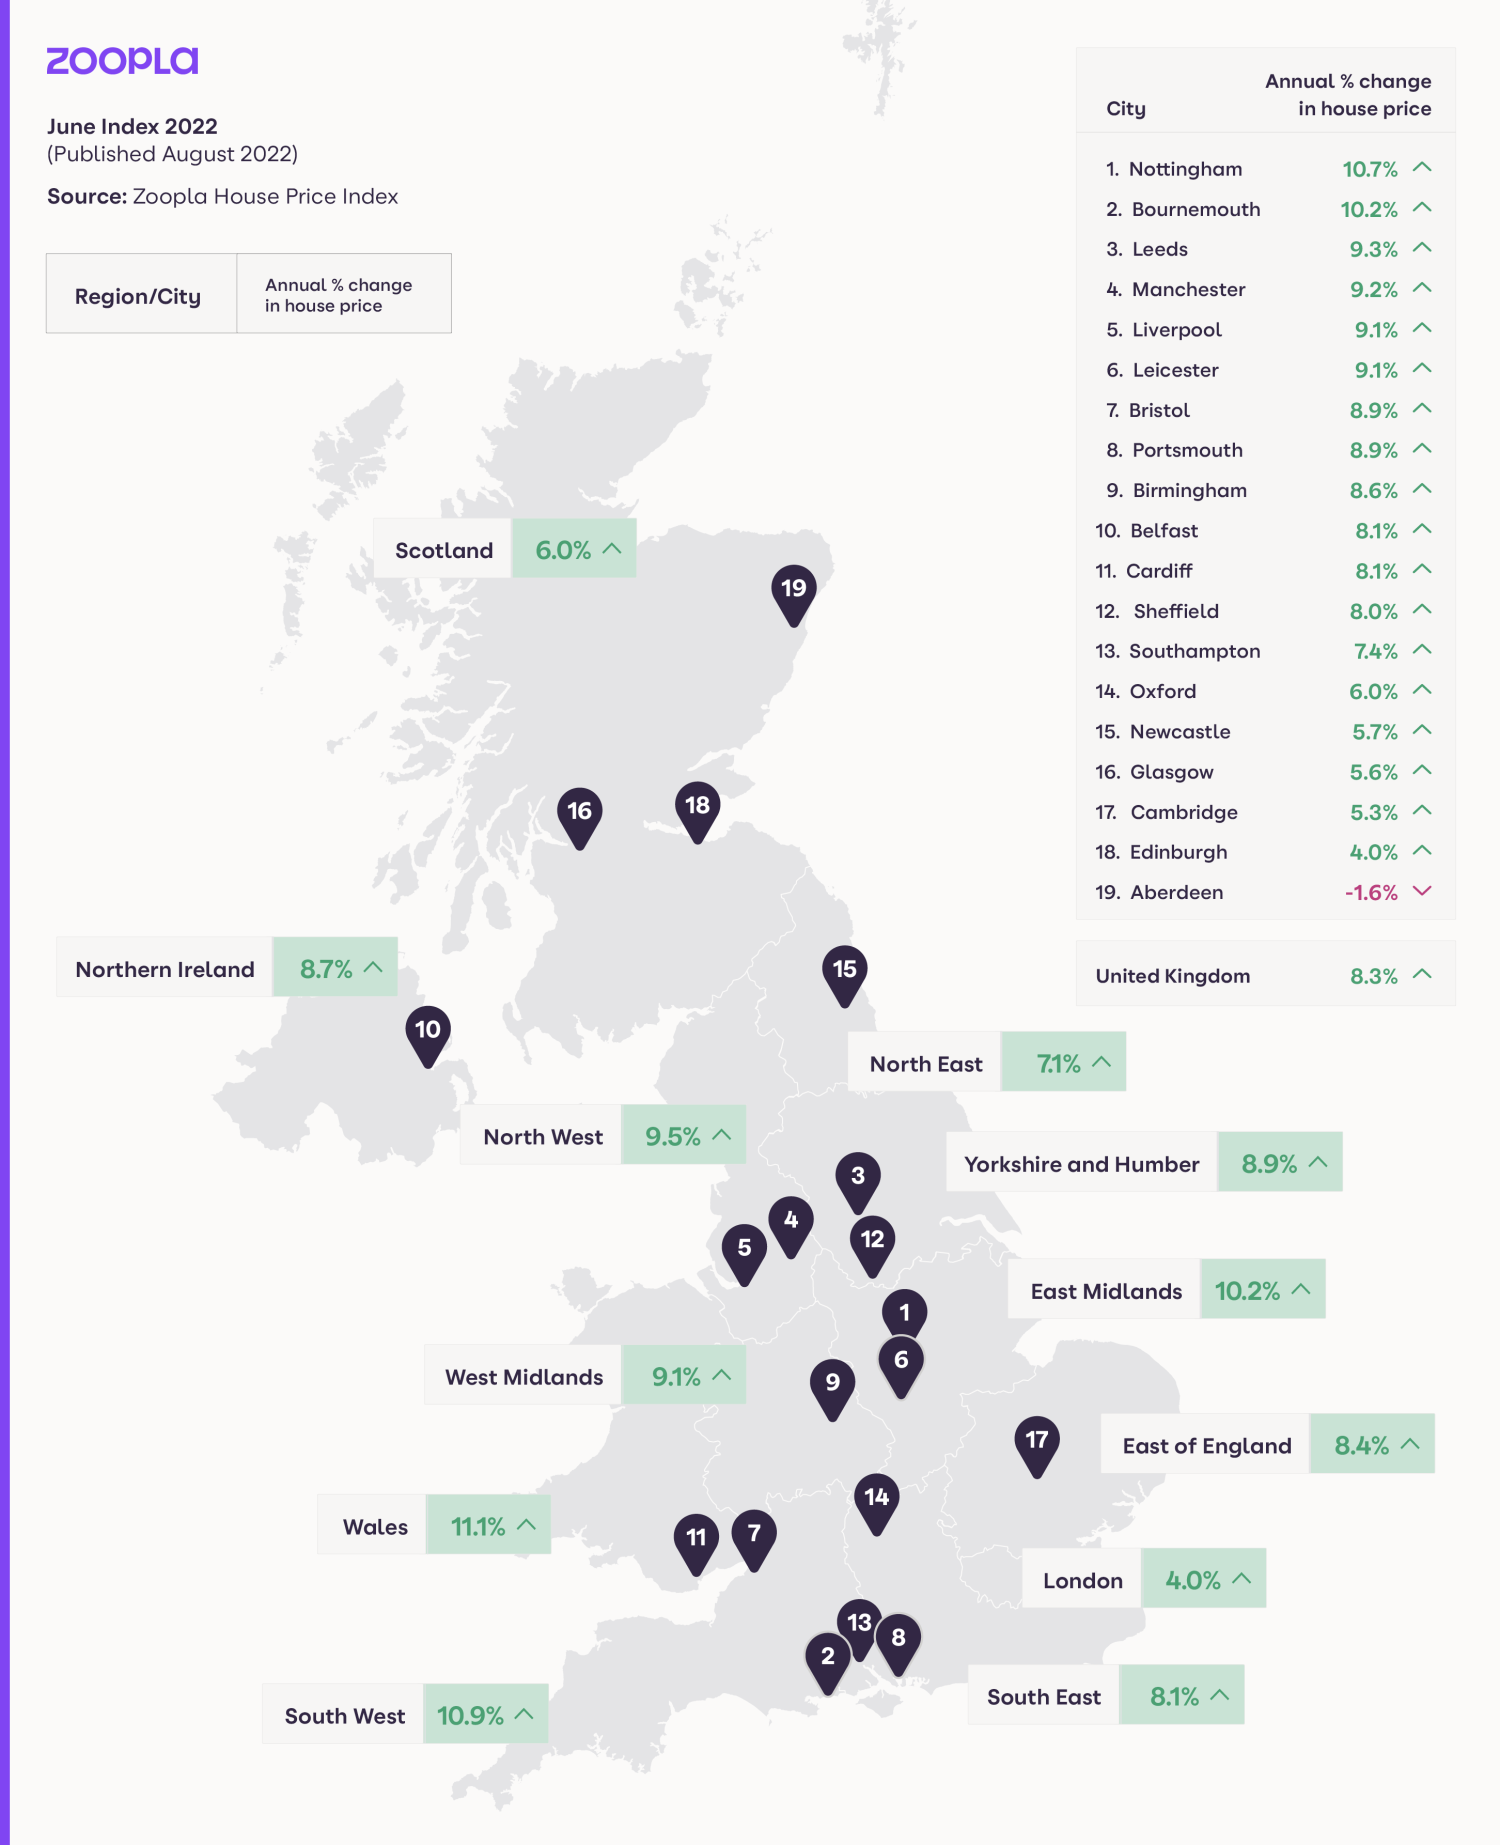 A map of the UK showing the regions and towns with strongest house price growth in the year to June 2022